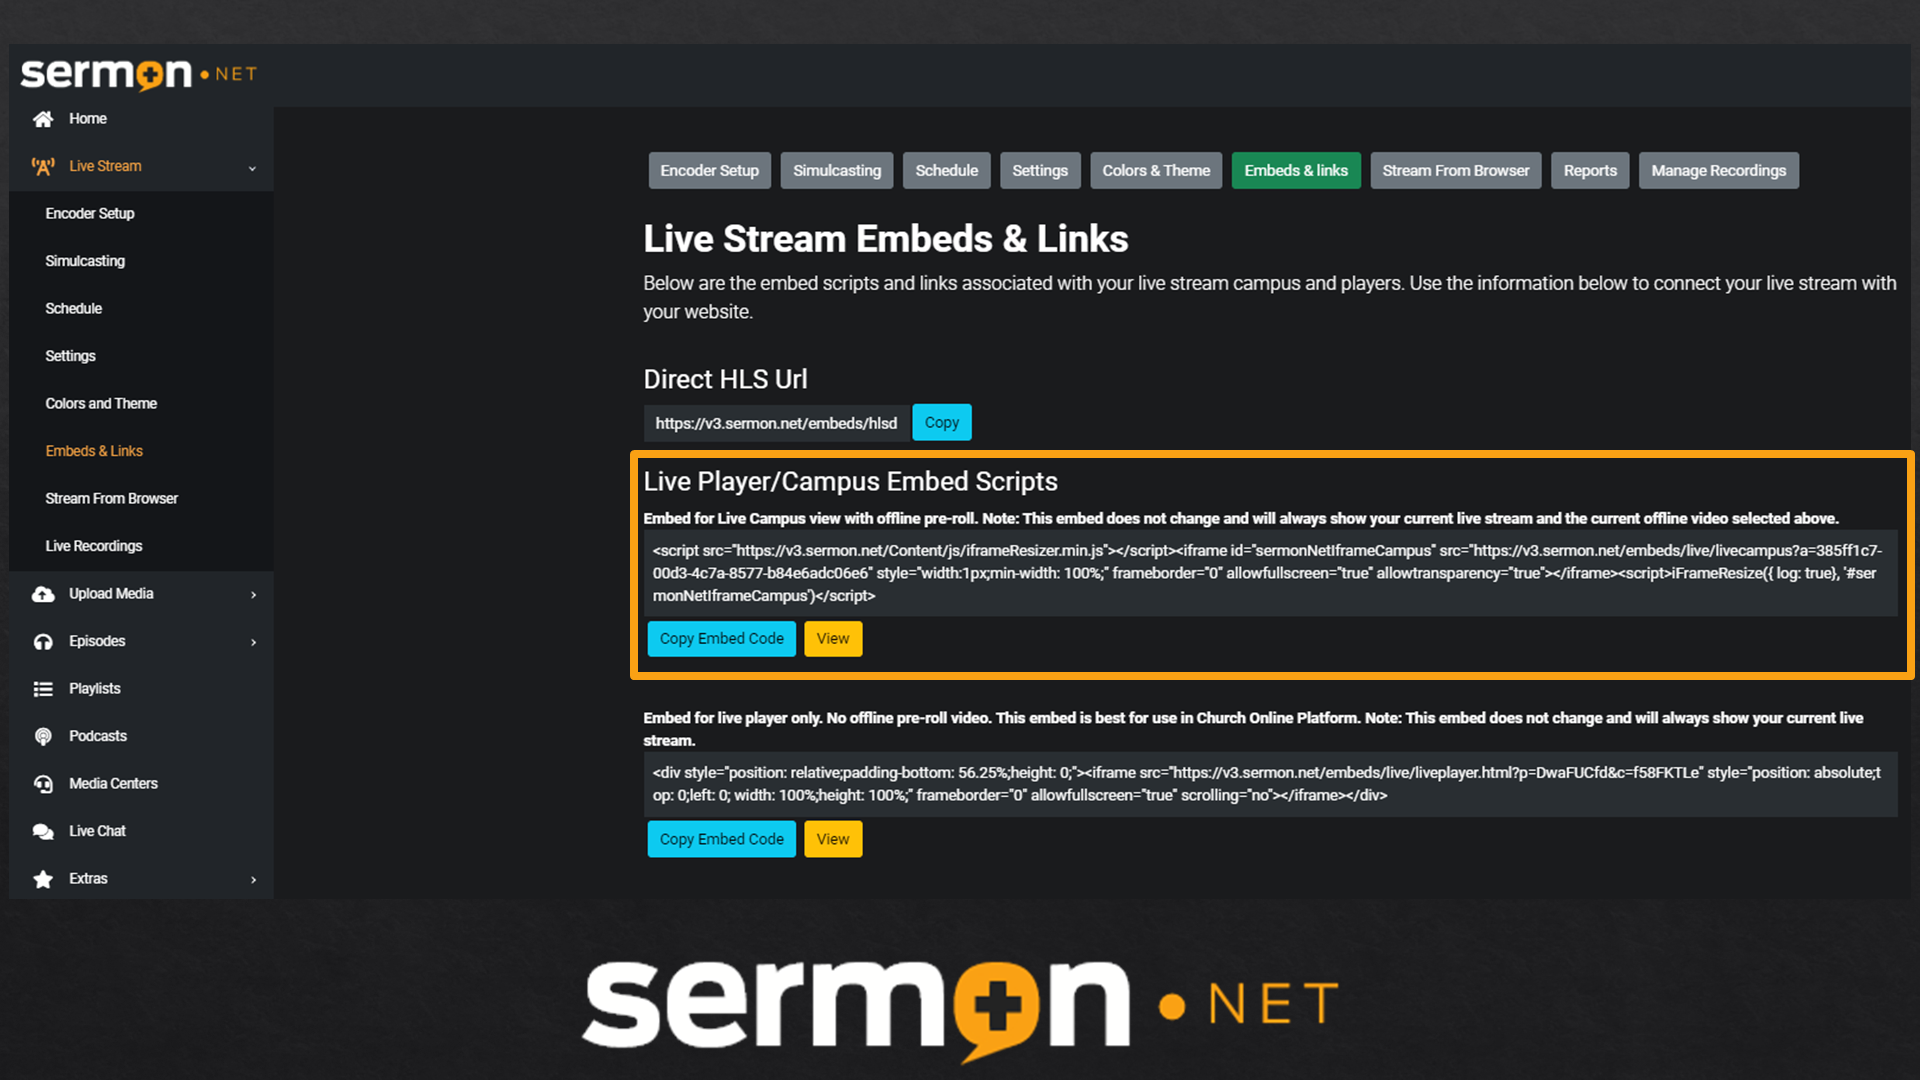 sermon.net campus player live streaming